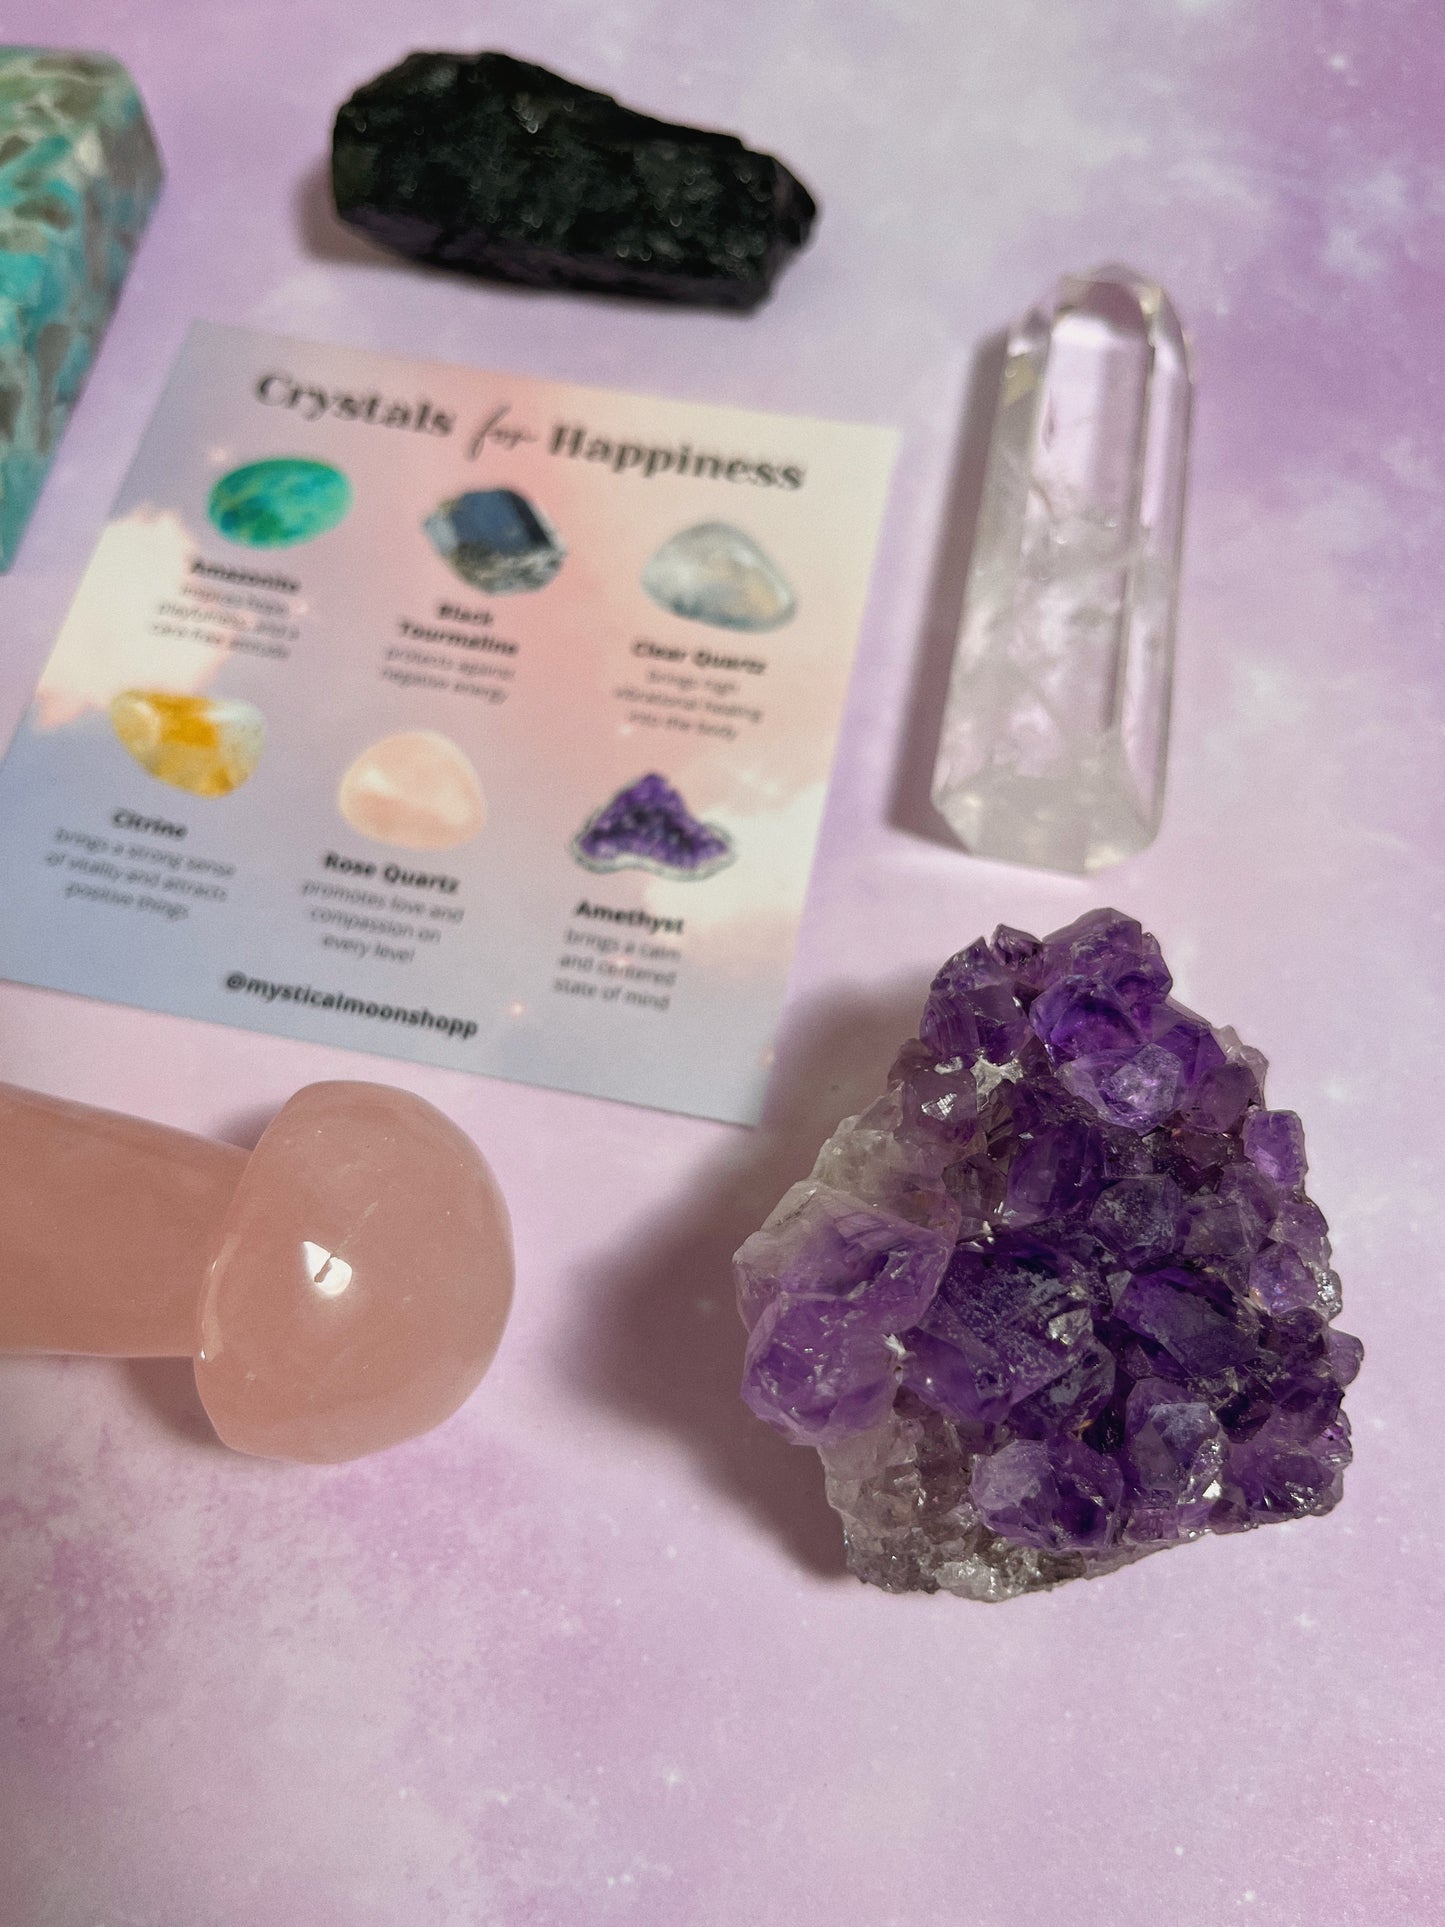 Crystal Set For Happiness